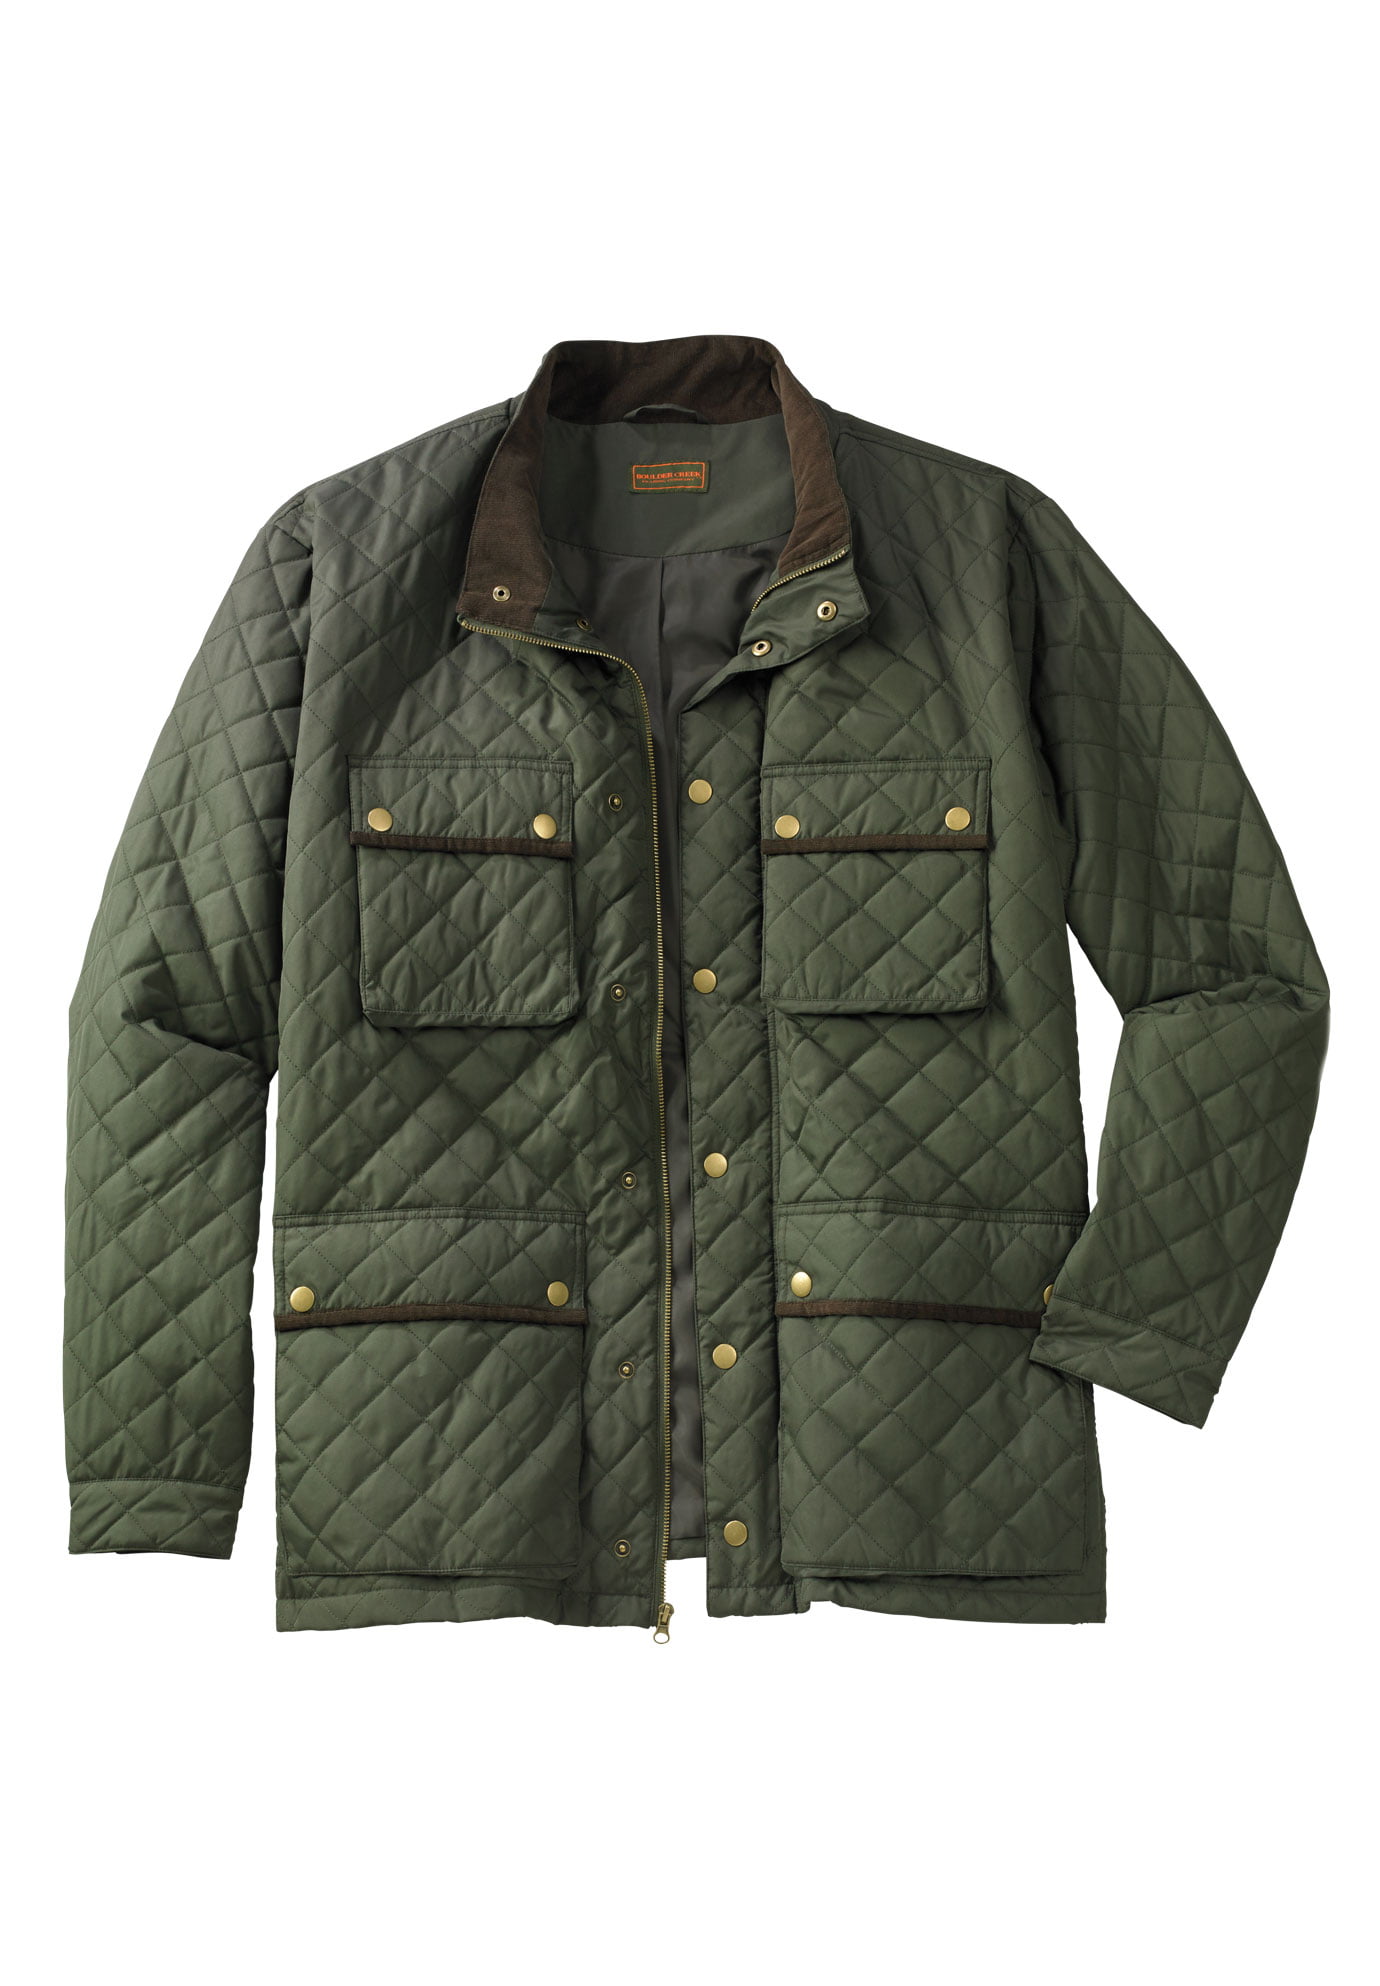 Boulder Creek by Kingsize Mens Big /& Tall Quilted Jacket